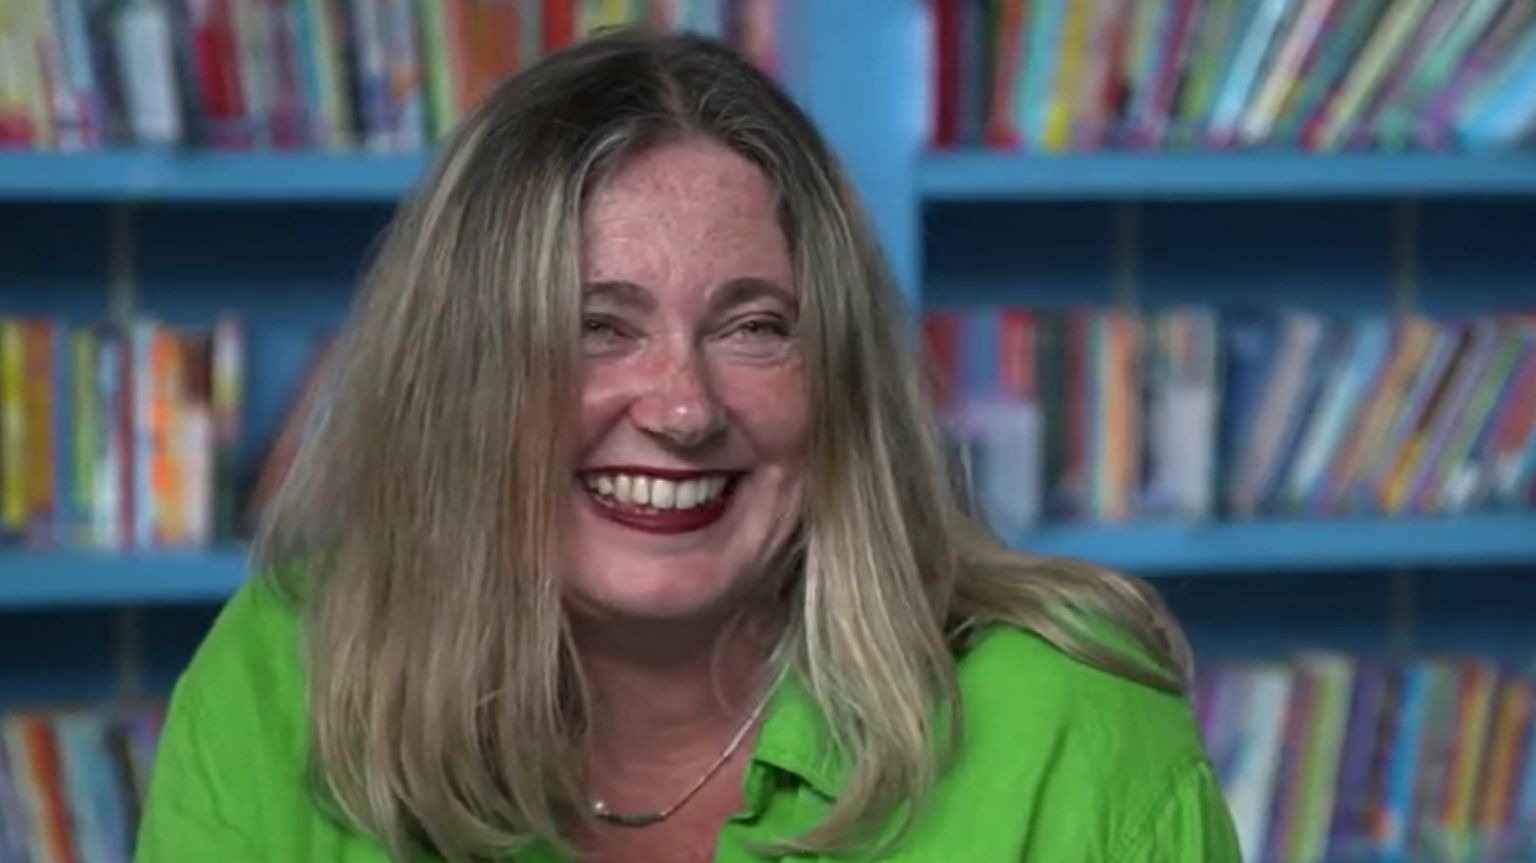 Headteacher Alison Bayliss with long blonde-brown hair wearing a green blouse, smiling with a bookcase in the background in soft focus